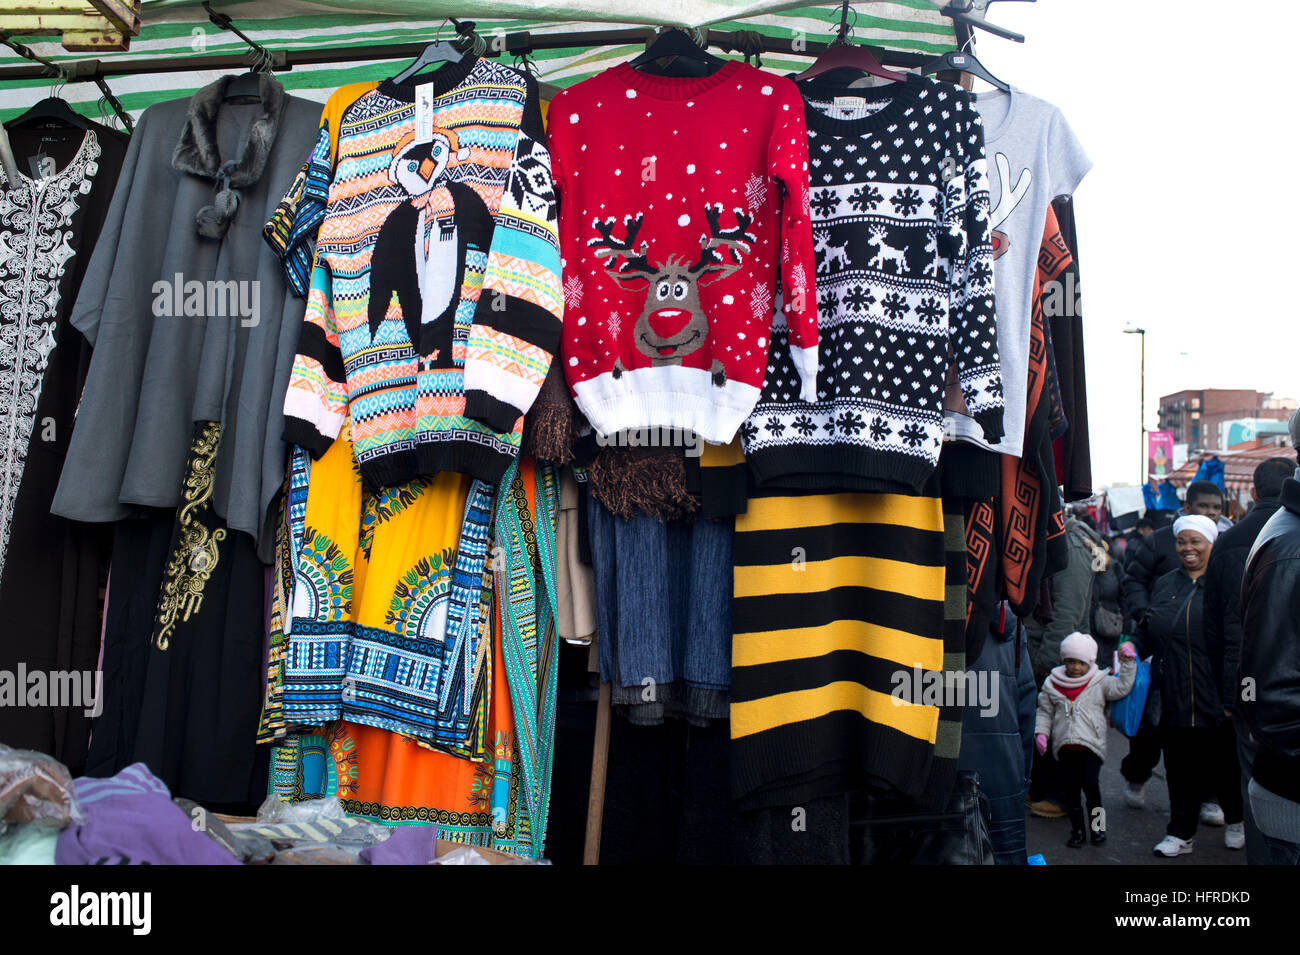 Hackney. Ridley Road market. Christmas jumpers on sale. Stock Photo